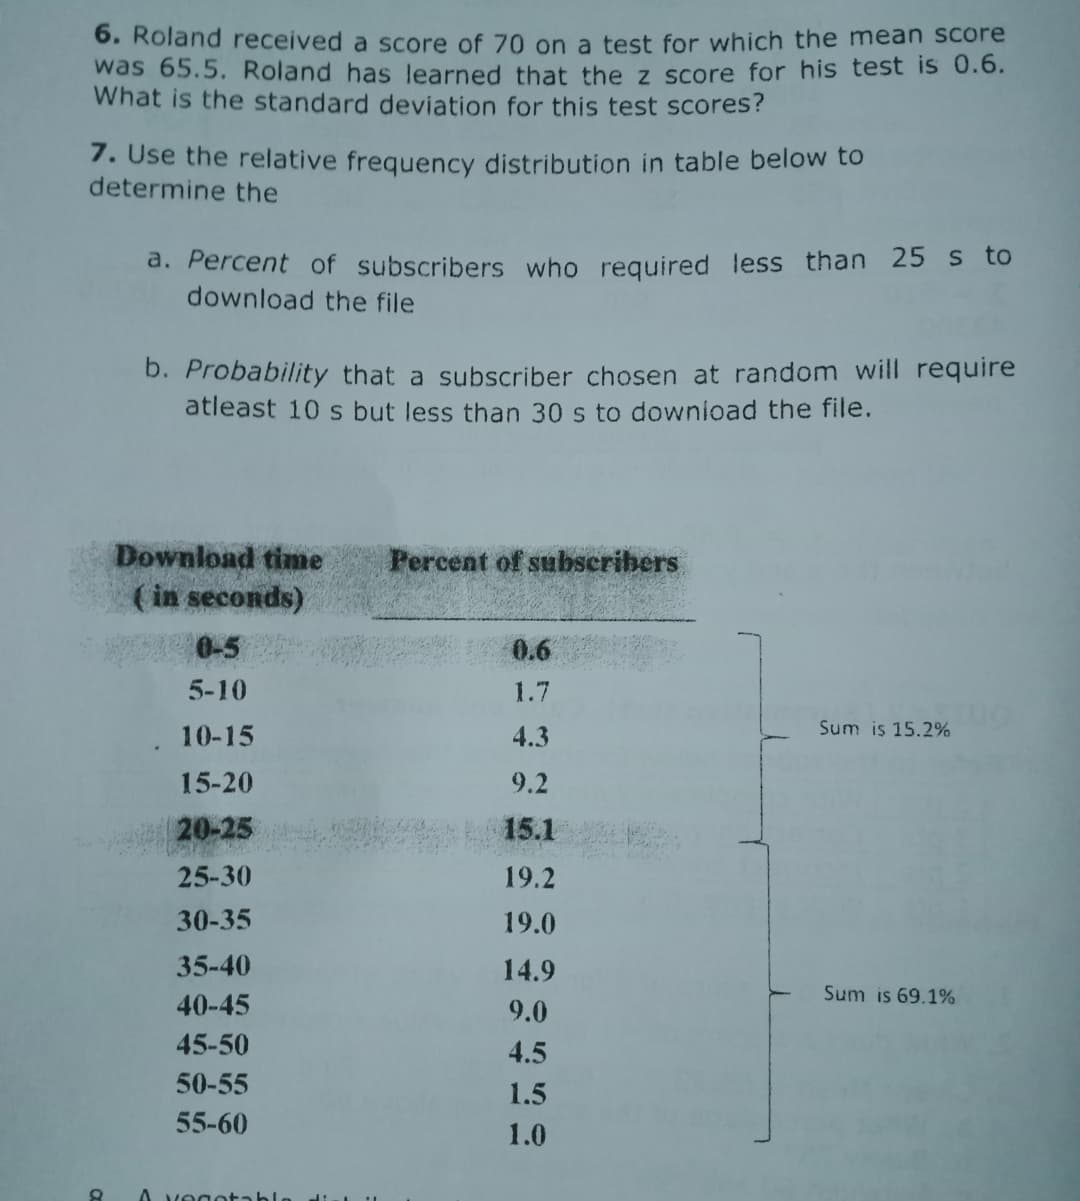 6. Roland received a score of 70 on a test for which the mean score
was 65.5. Roland has learned that the z score for his test is 0.6.
What is the standard deviation for this test scores?
7. Use the relative frequency distribution in table below to
determine the
a. Percent of subscribers who required less than 25 s to
download the file
b. Probability that a subscriber chosen at random will require
atleast 10 s but less than 30 s to downioad the file.
Download time
( in seconds)
Percent of subscribers
0-5
0.6
5-10
1.7
10-15
4.3
Sum is 15.2%
15-20
9.2
20-25
15.1
25-30
19.2
30-35
19.0
35-40
14.9
Sum is 69.1%
40-45
9.0
45-50
4.5
50-55
1.5
55-60
1.0
A vegotahlo
